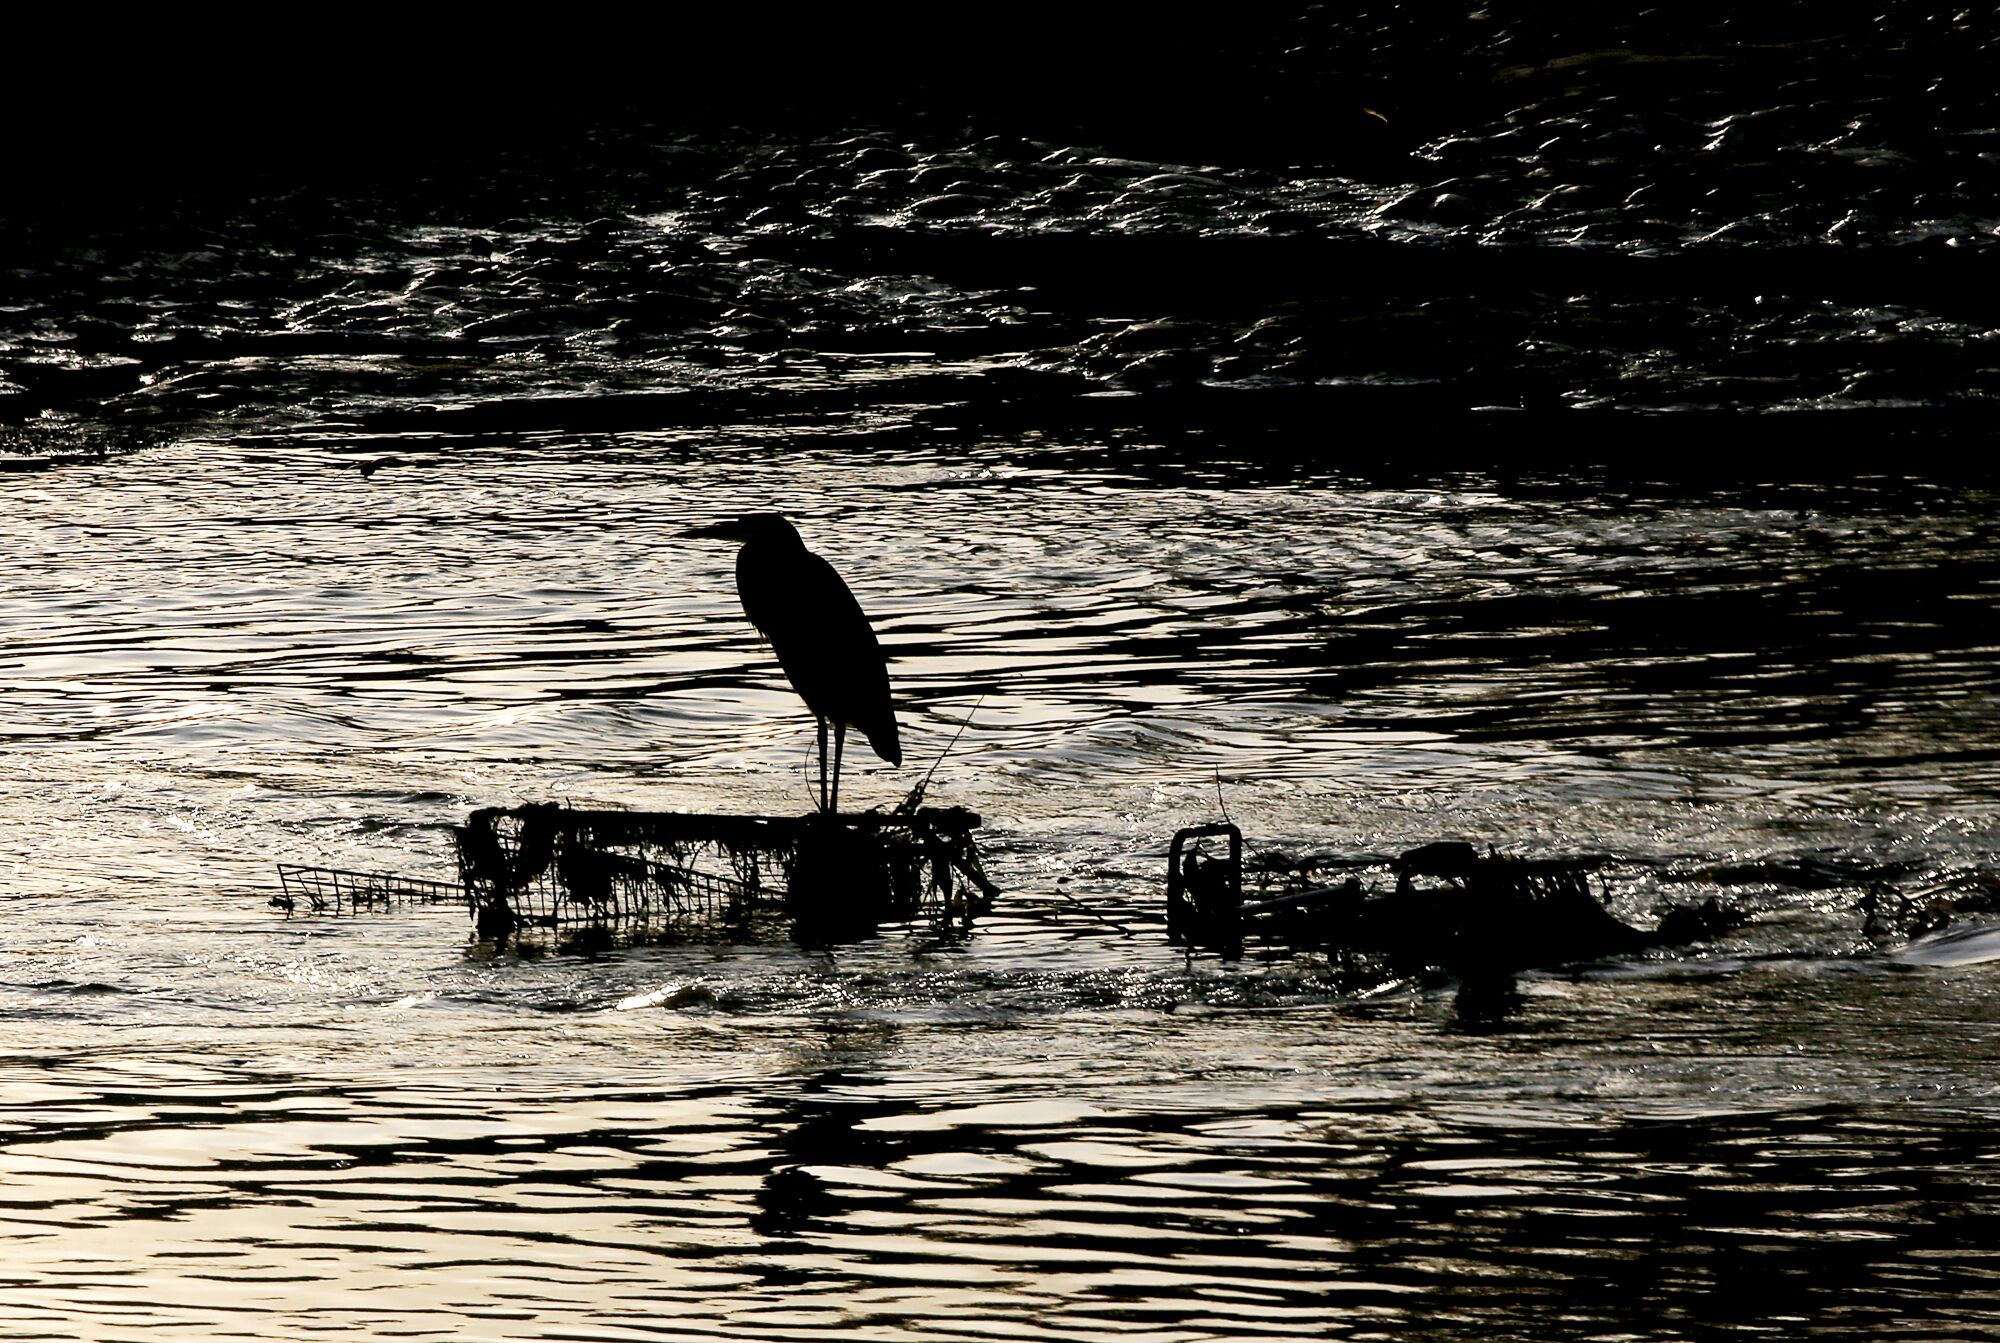 A heron perches on a discarded shopping cart in the Los Angeles River in Long Beach.